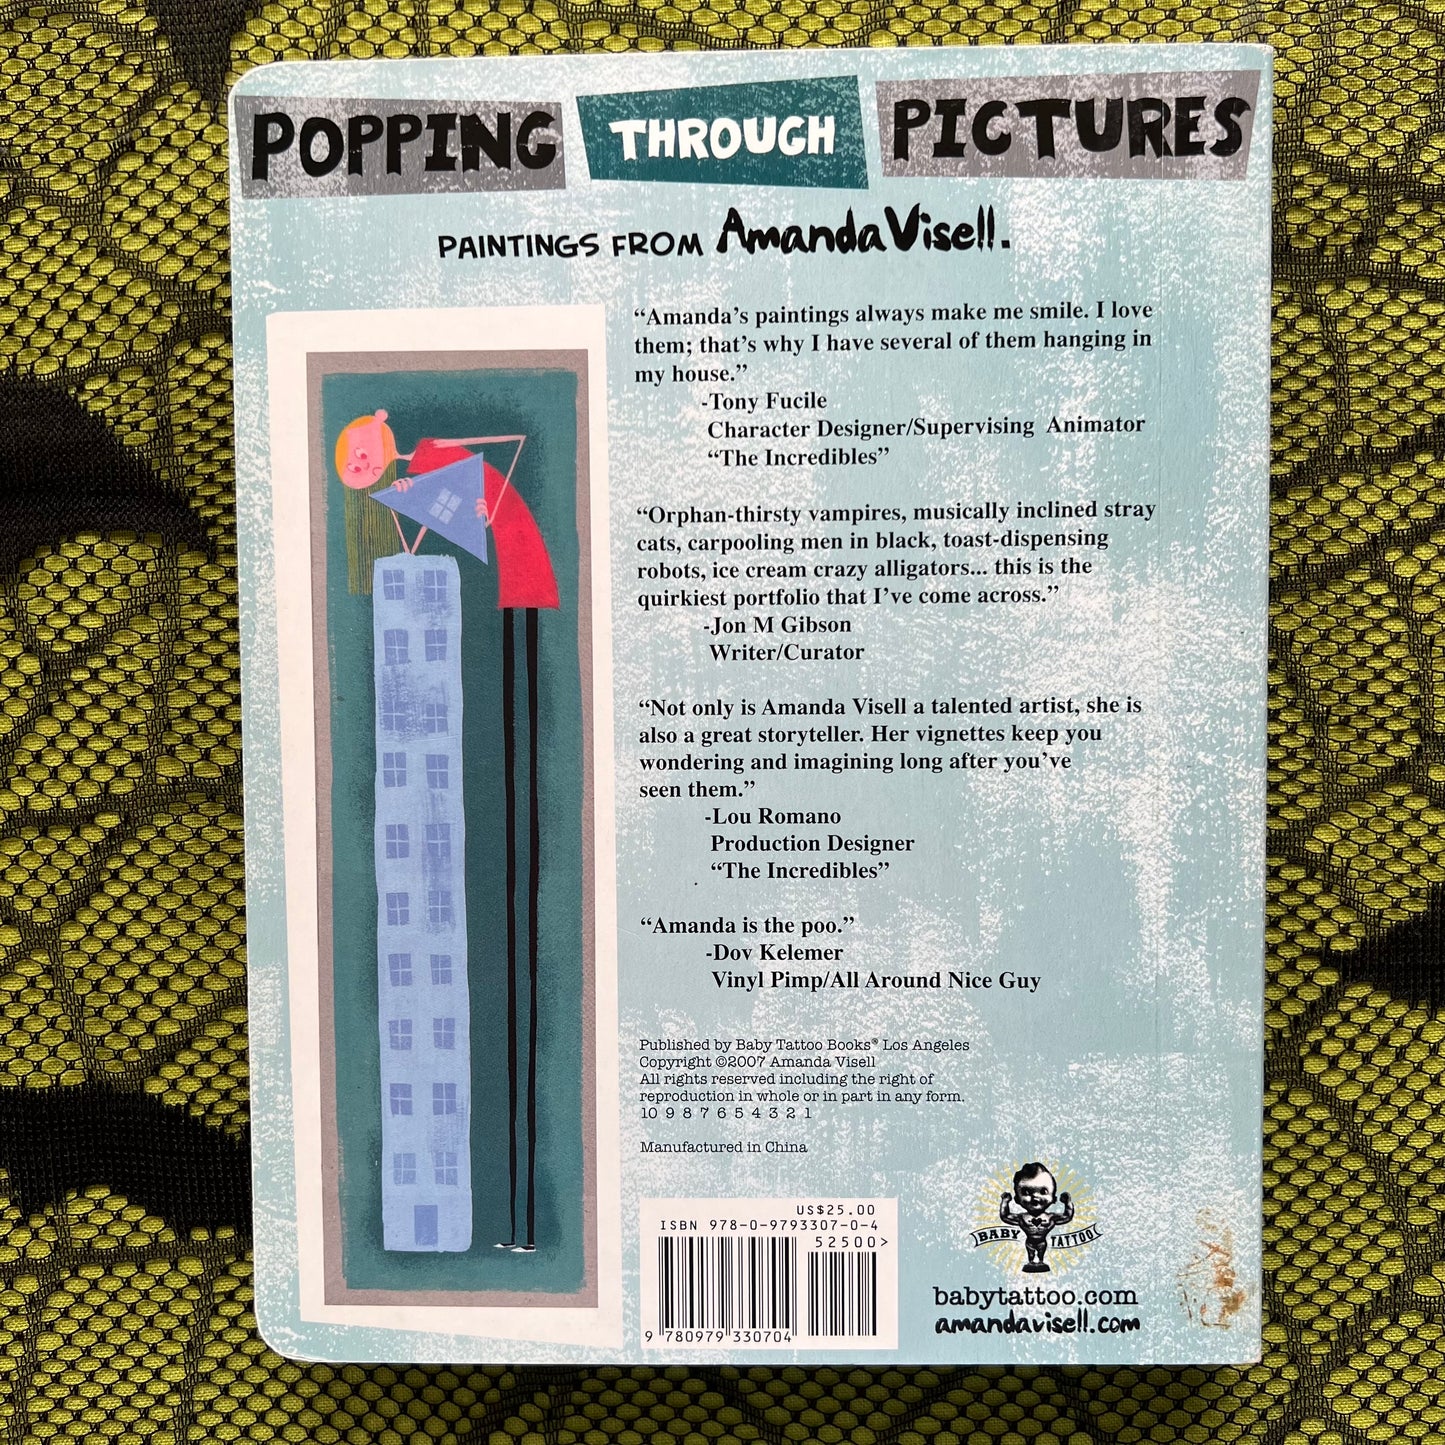 Popping Through Pictures- Paintings from Amanda Visell- Signed Hardcover